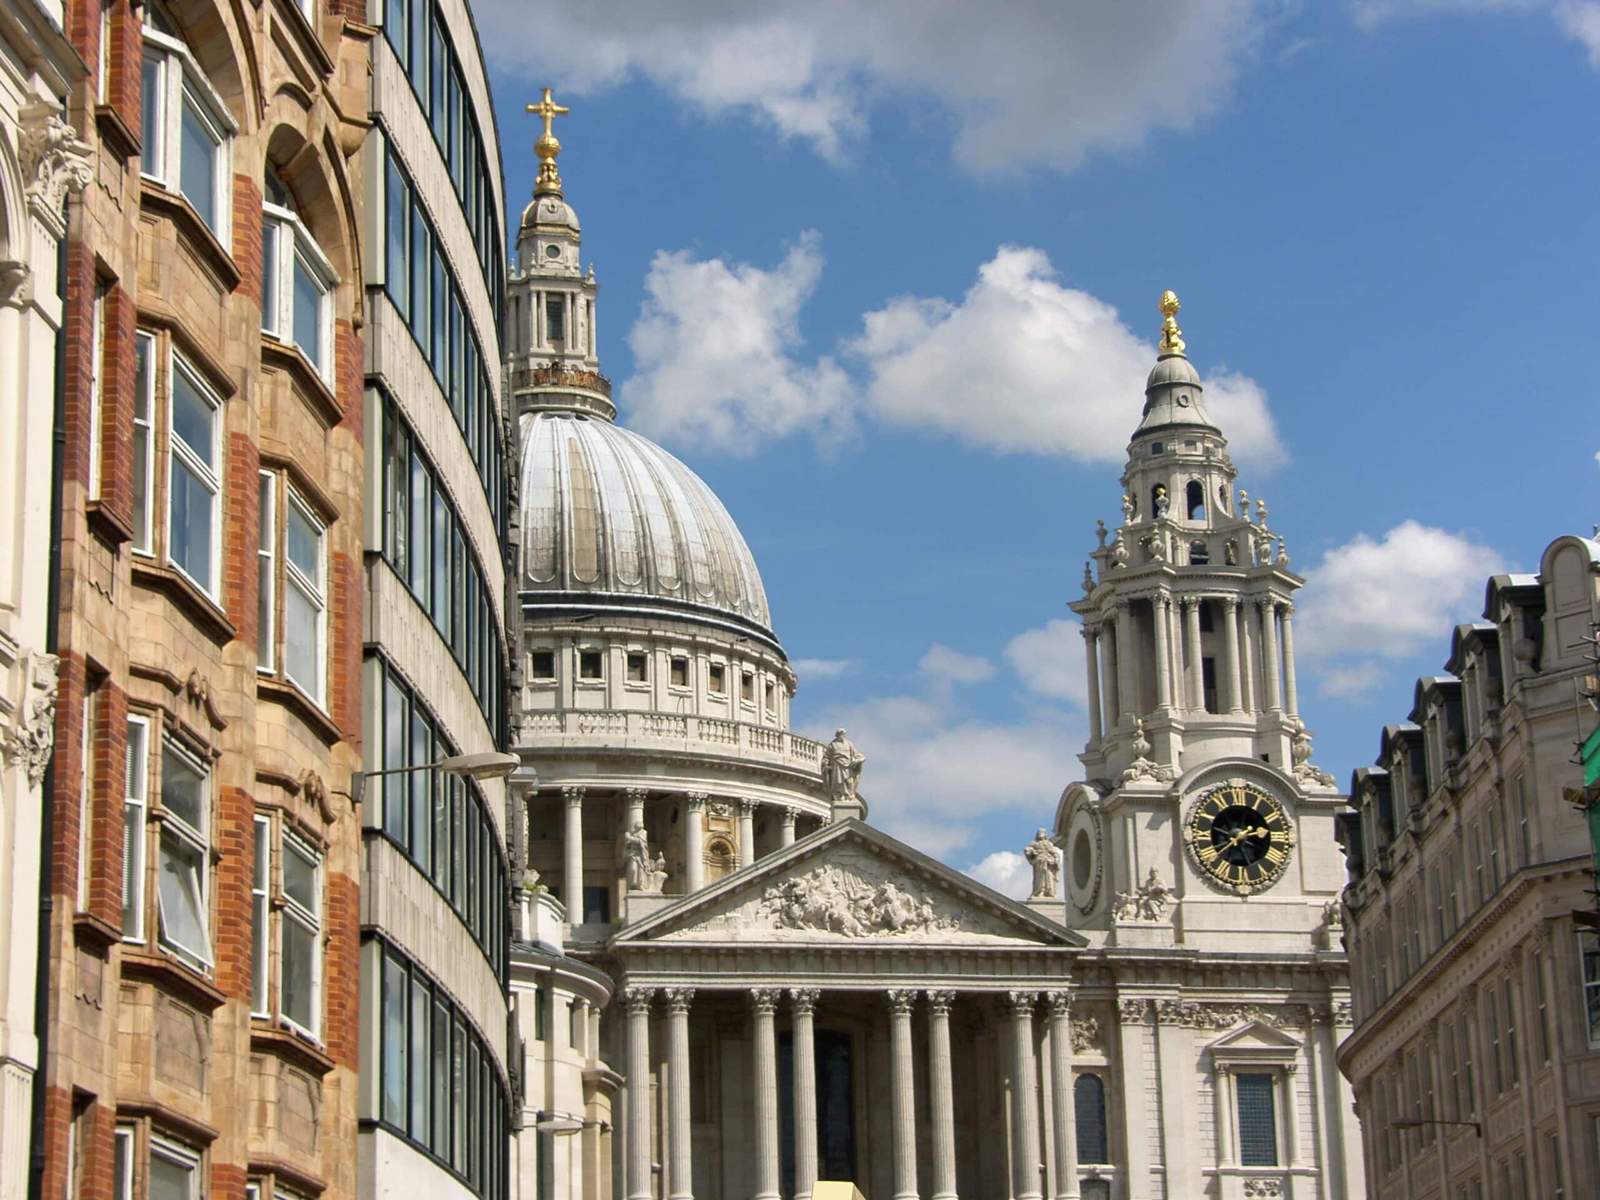 London: The present meets history in its diverse architecture